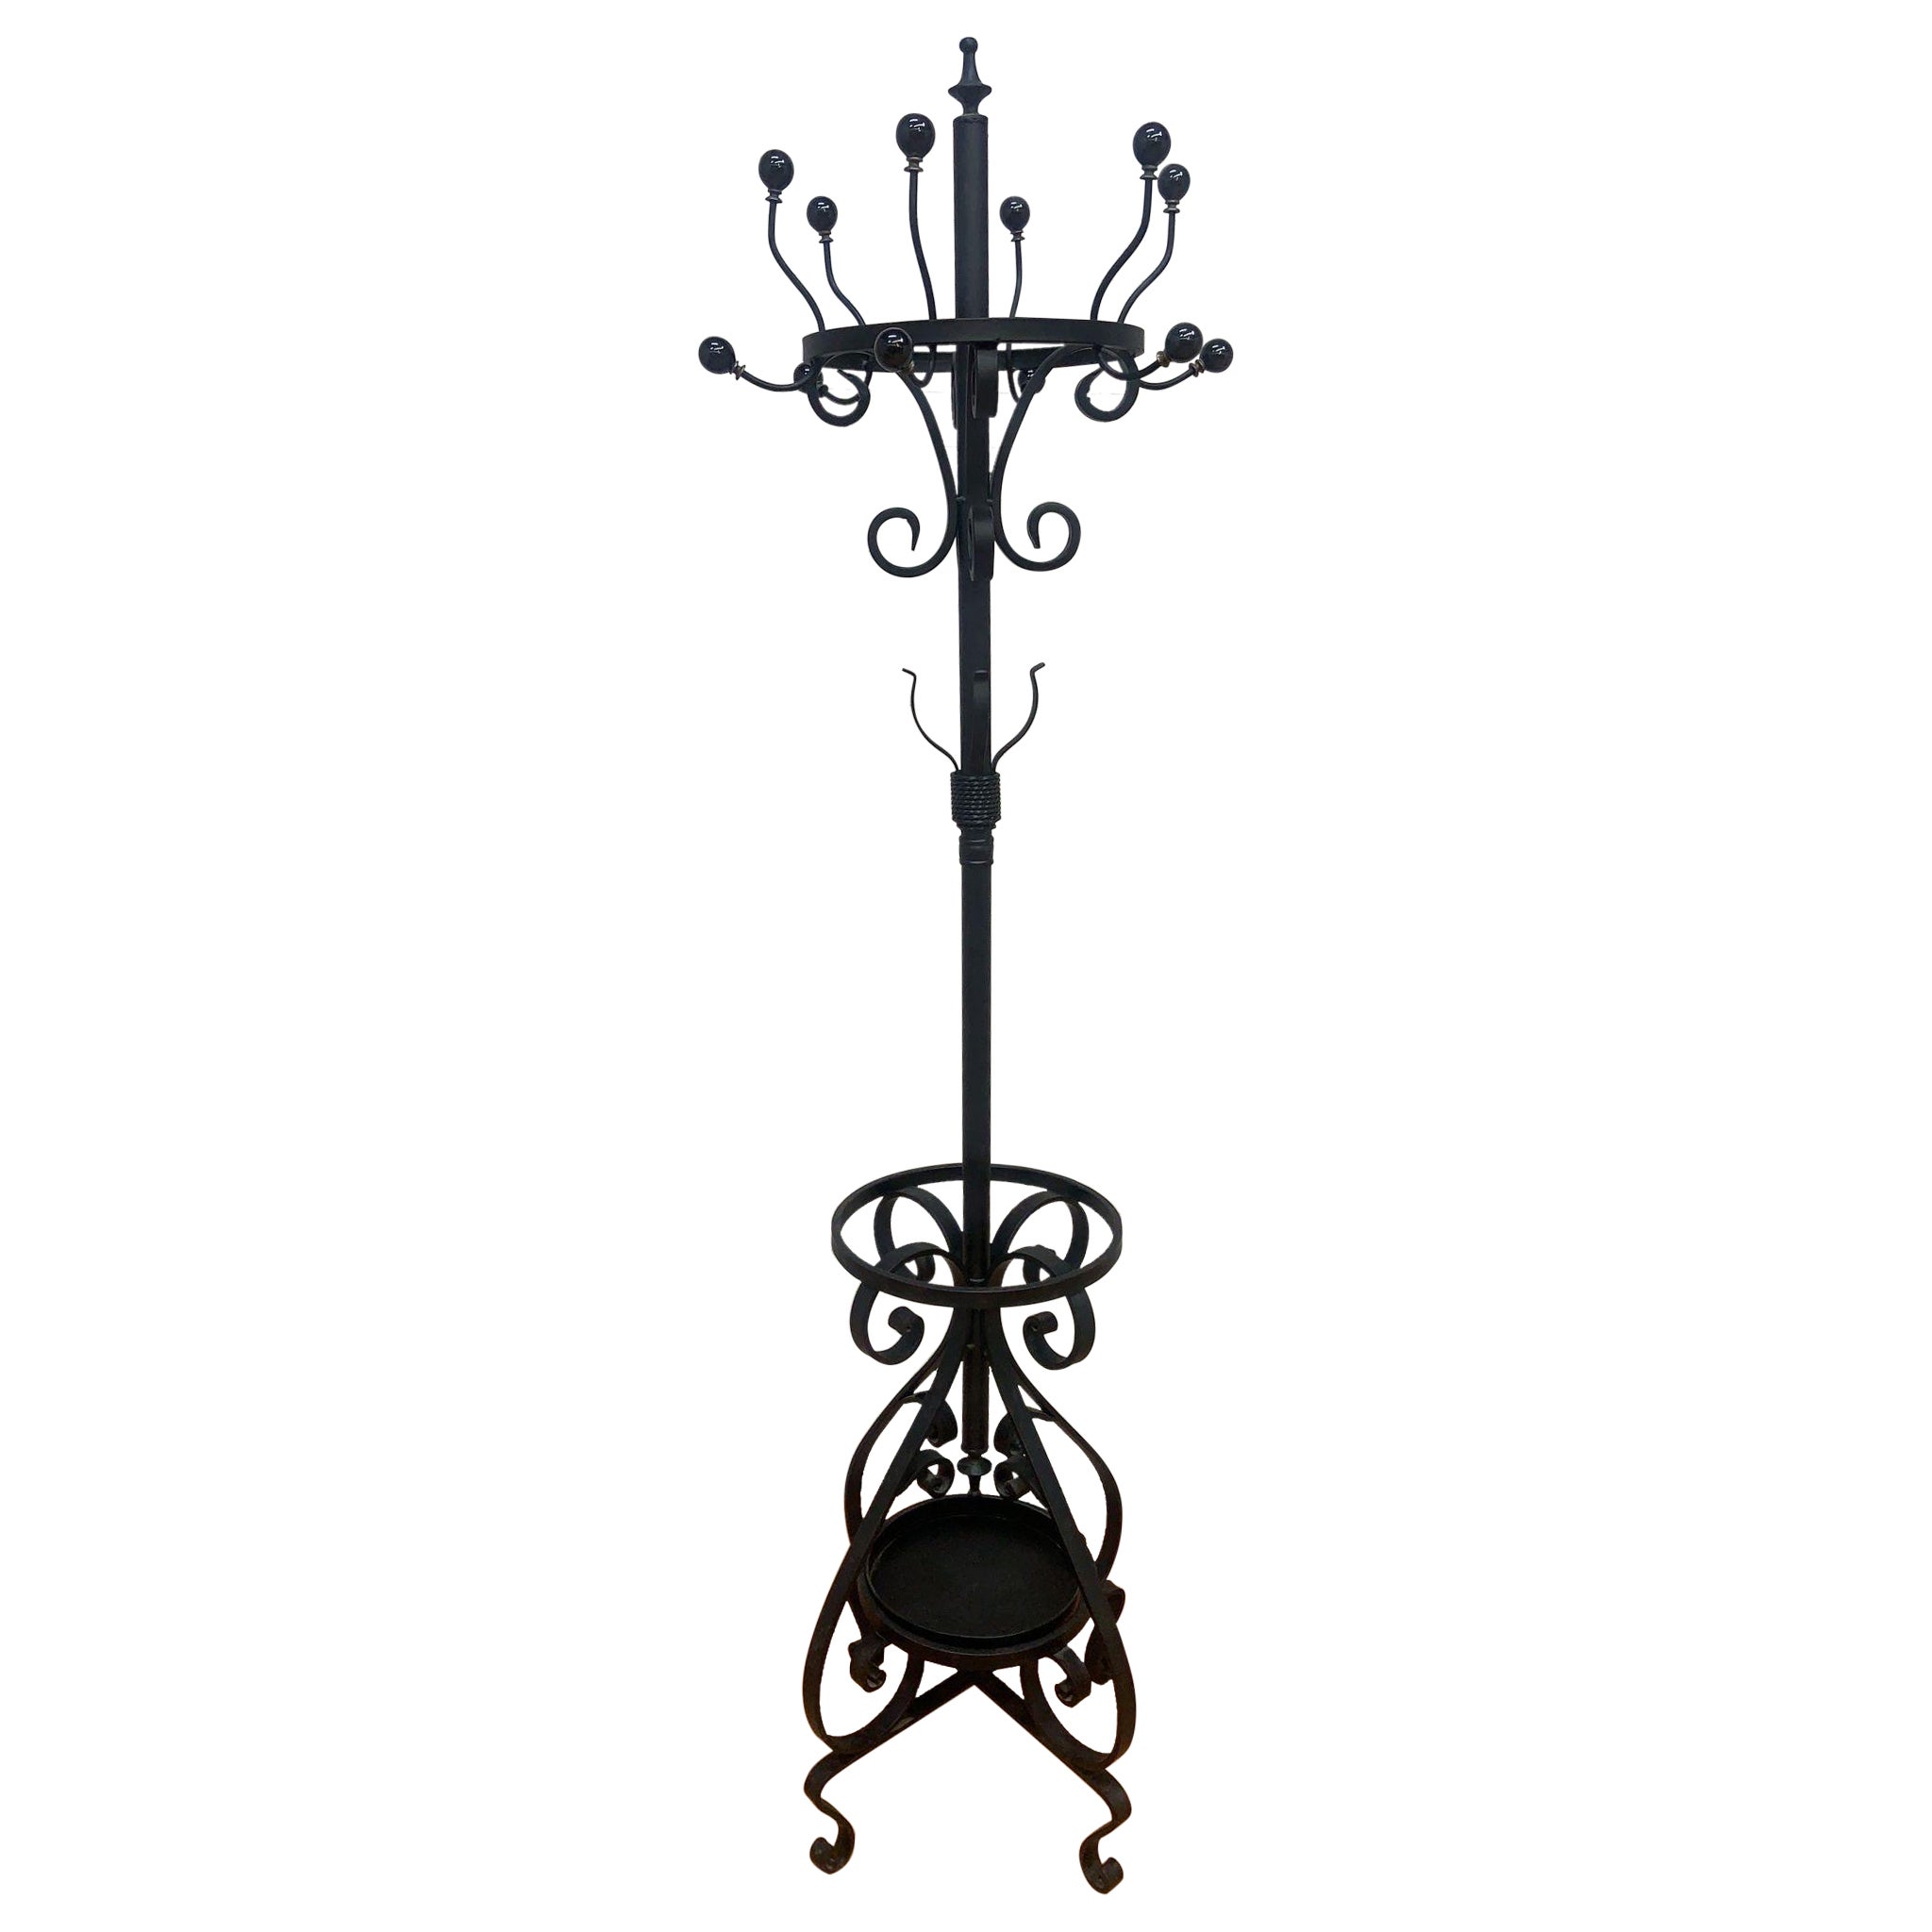 Vintage Cast Iron Coat Rack With Umbrella Stand For Sale